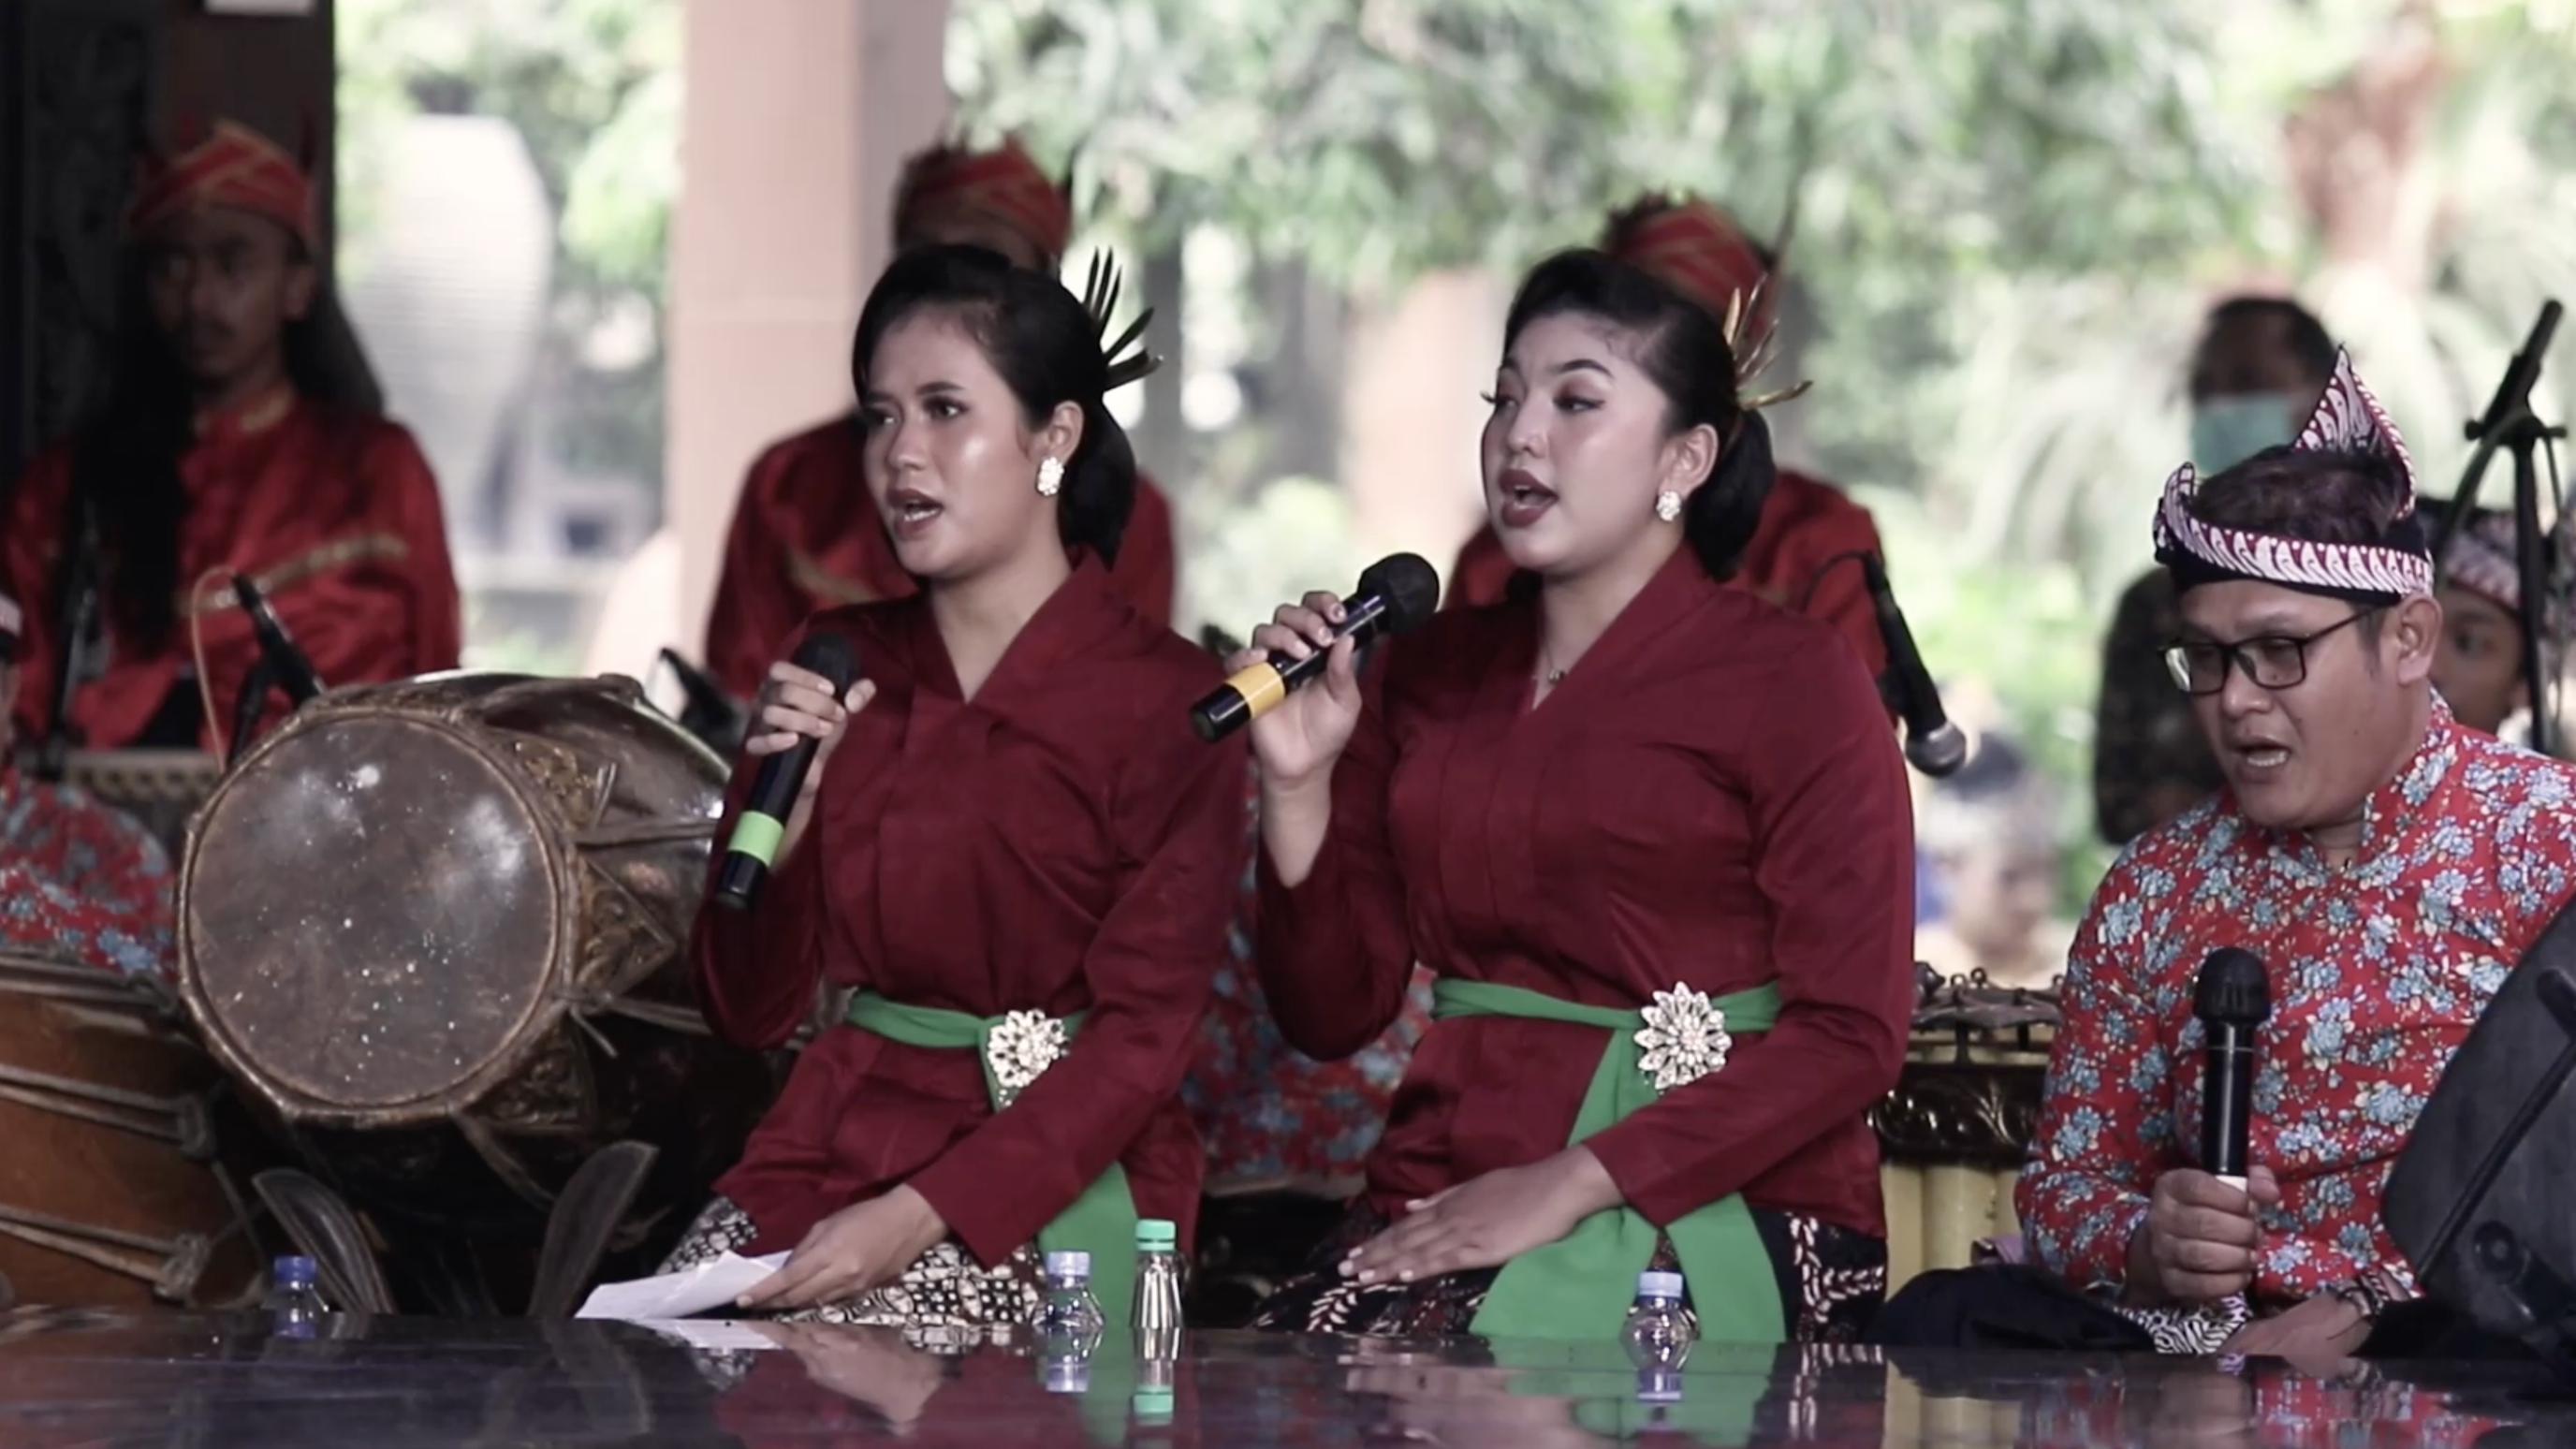 Indonesian teenagers carry forward traditional Javanese music culture